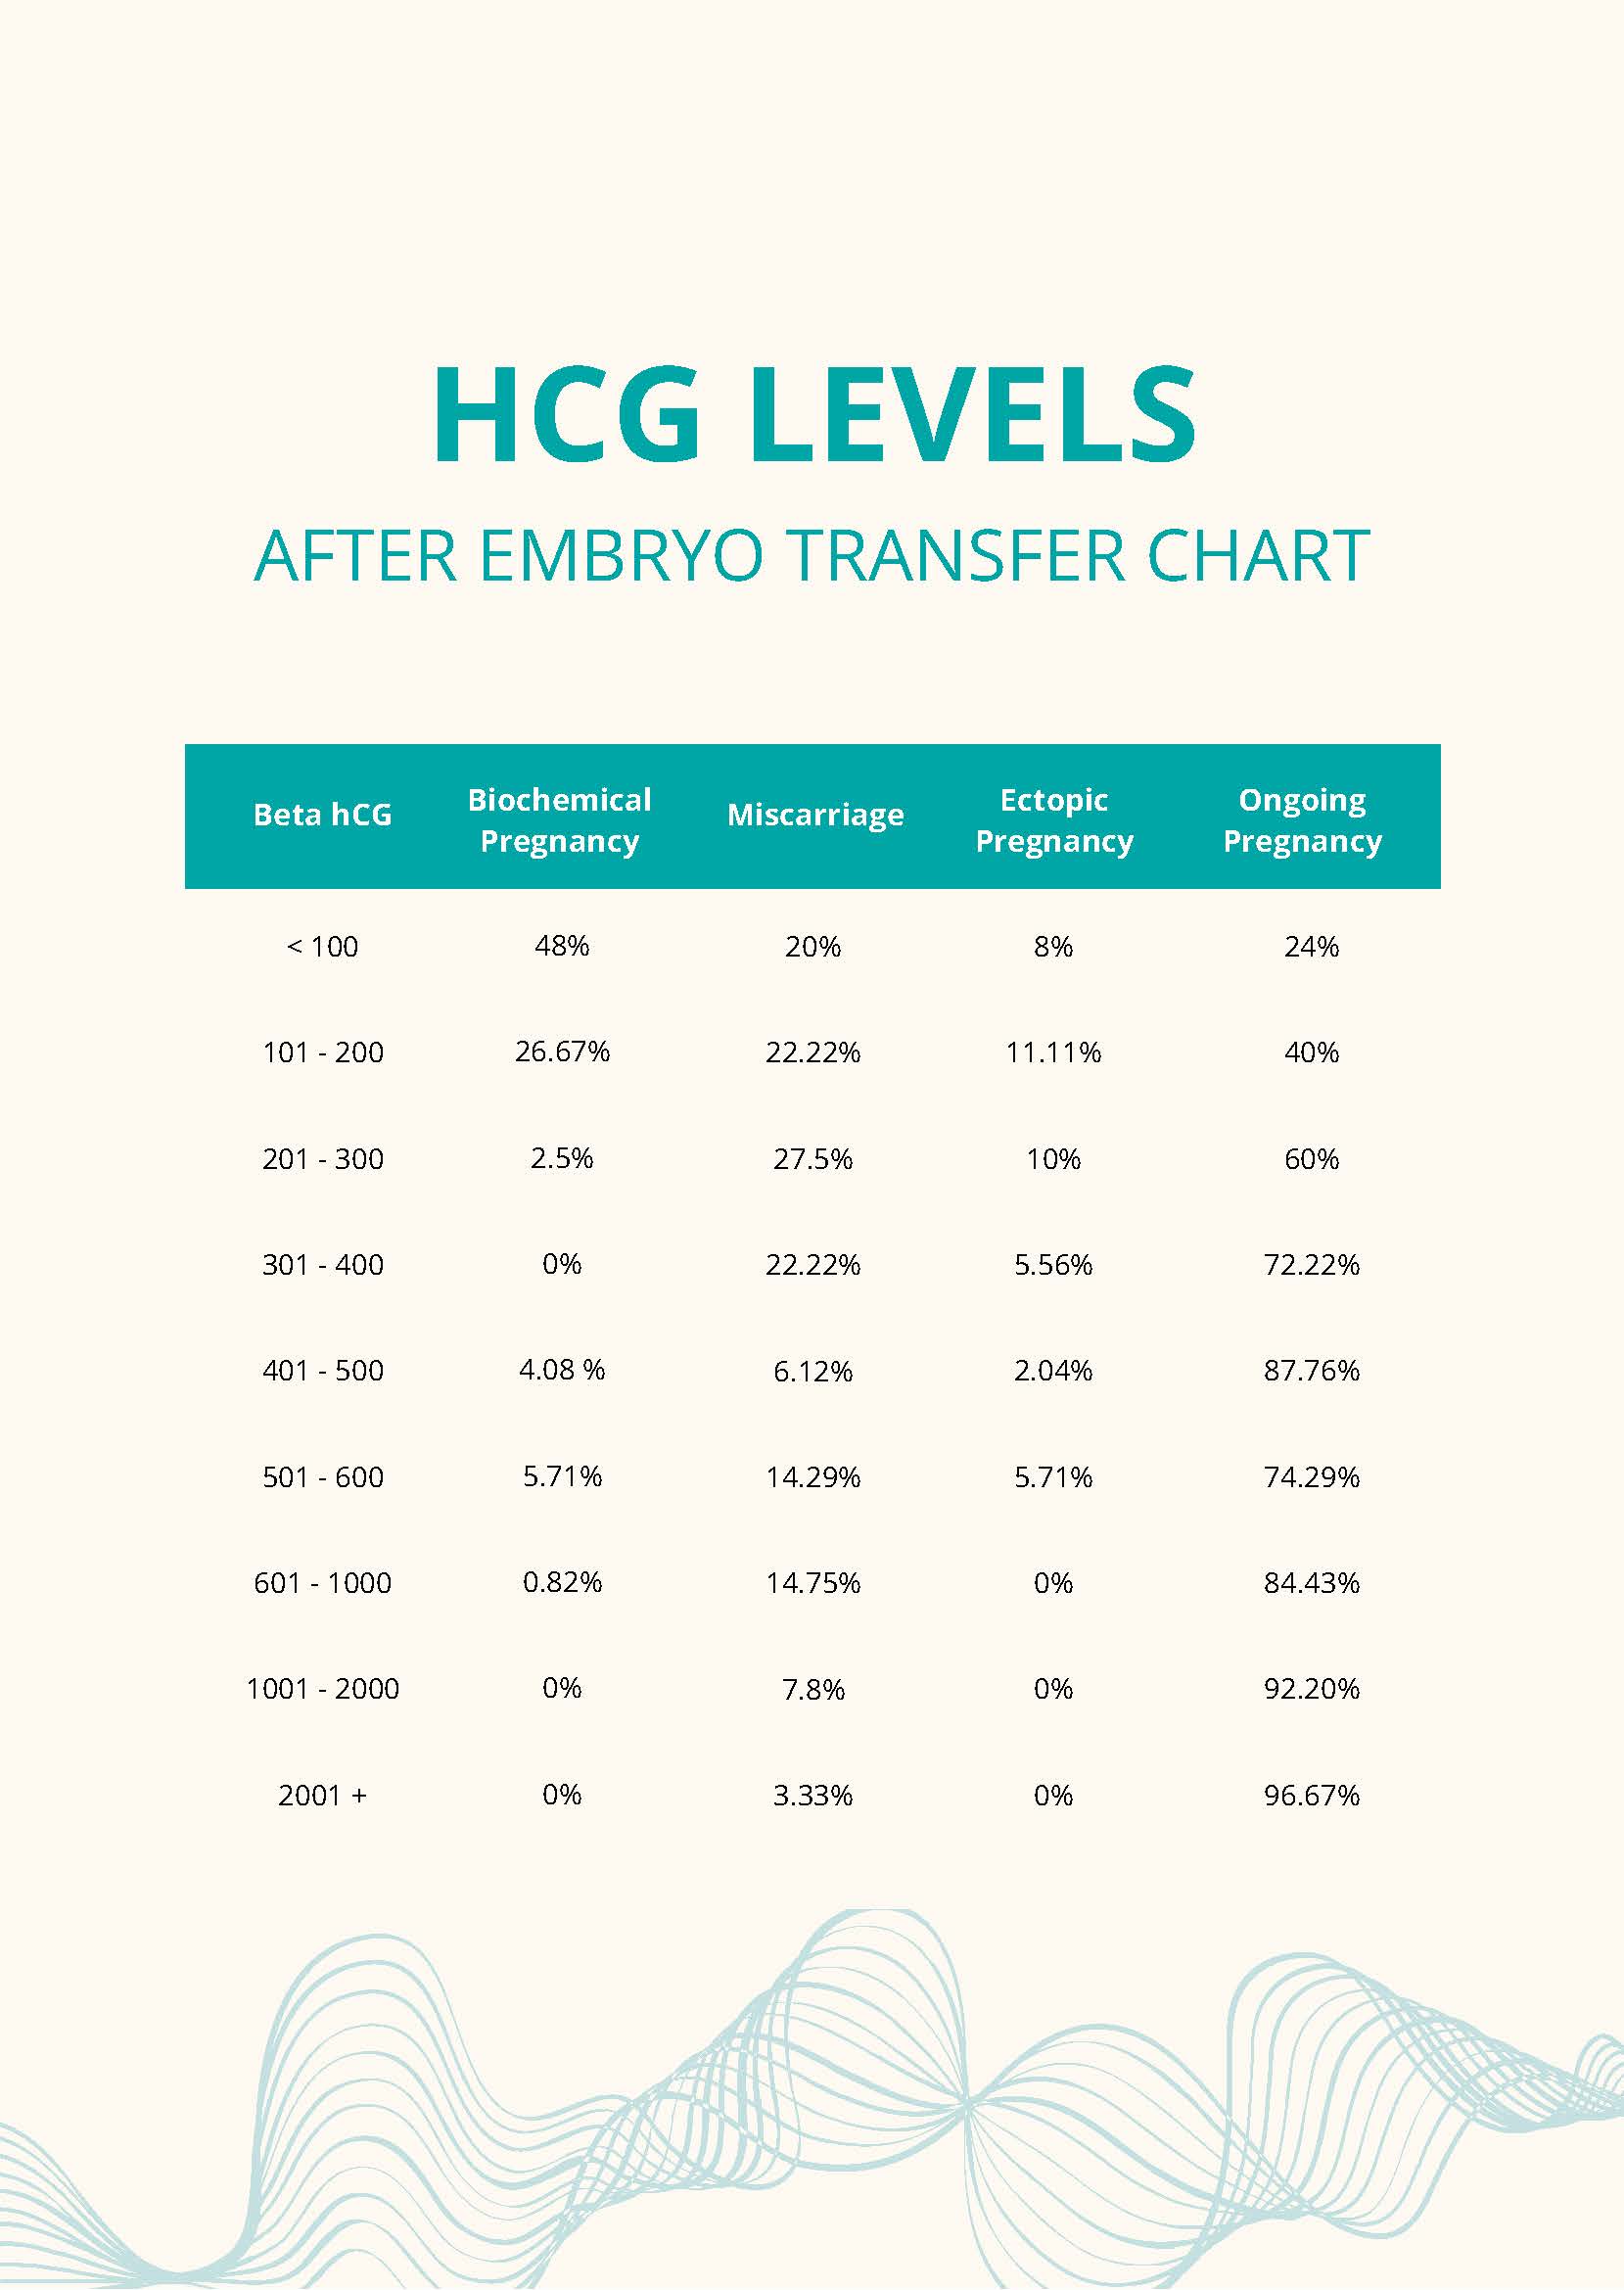 HCG Levels After Embryo Transfer Chart